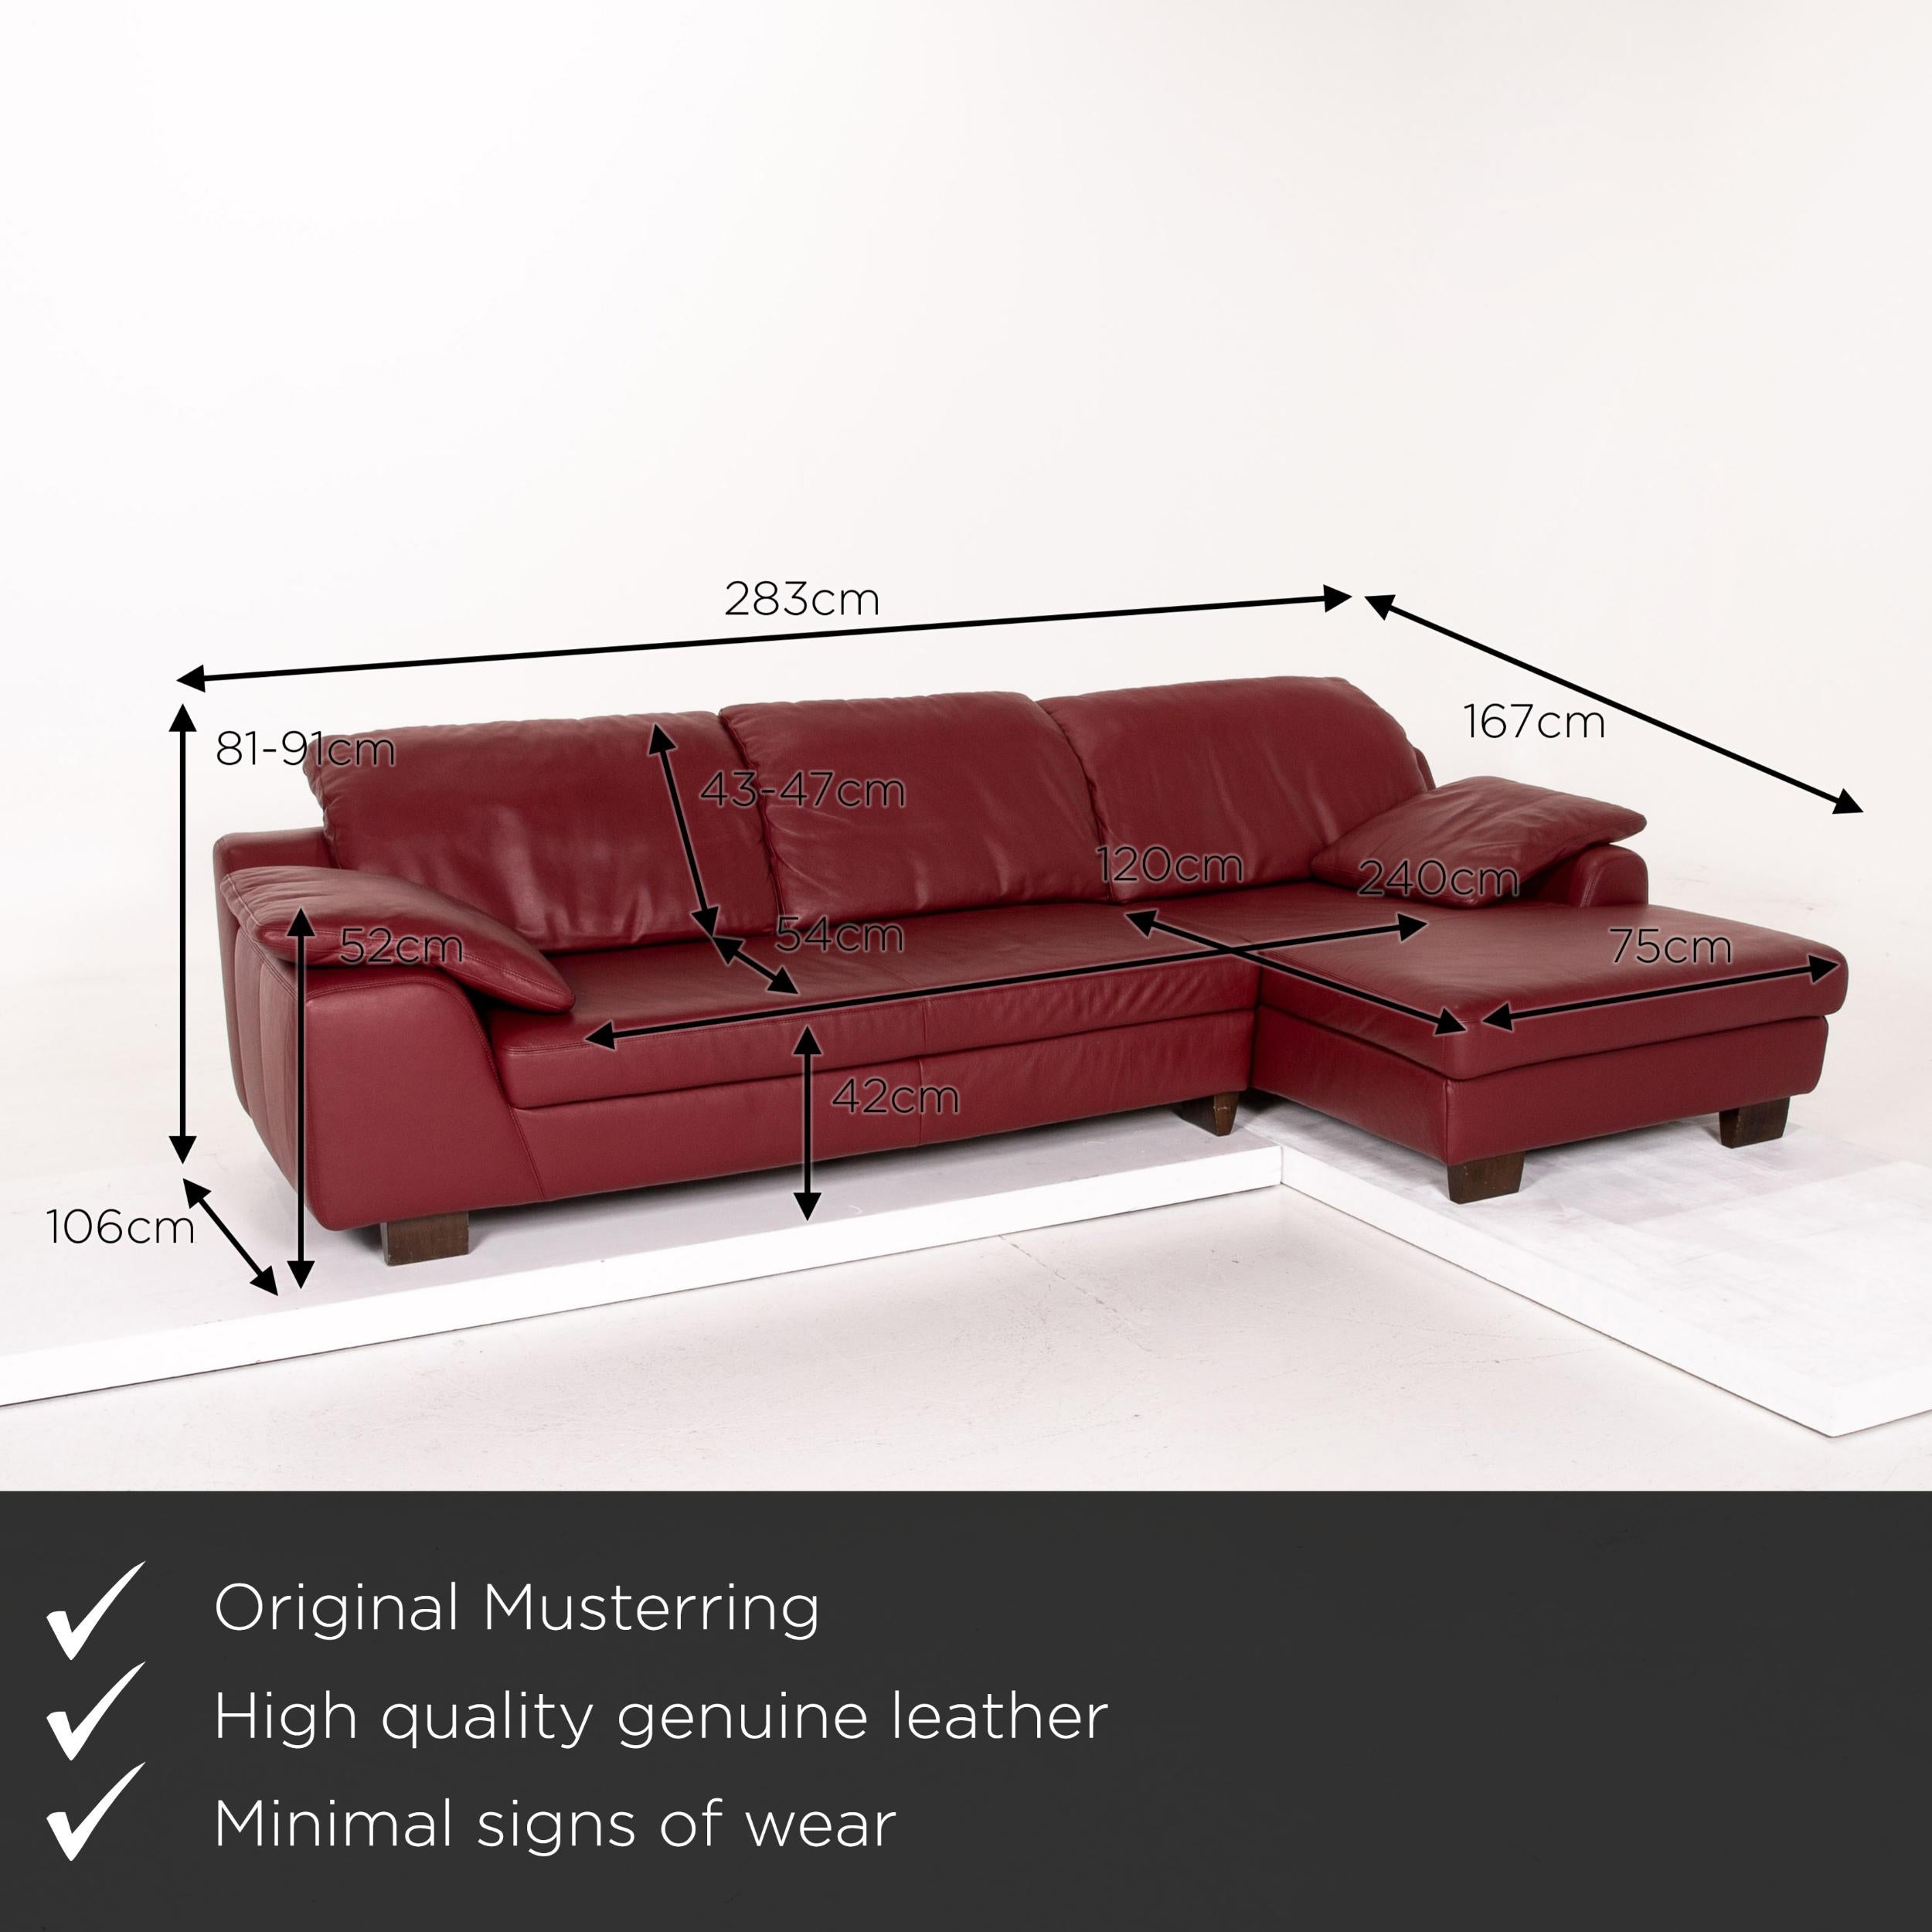 We present to you a Musterring leather corner sofa red dark red sofa couch.

 

 Product measurements in centimeters:
 

Depth 104
Width 283
Height 81
Seat height 42
Rest height 52
Seat depth 54
Seat width 240
Back height 43.